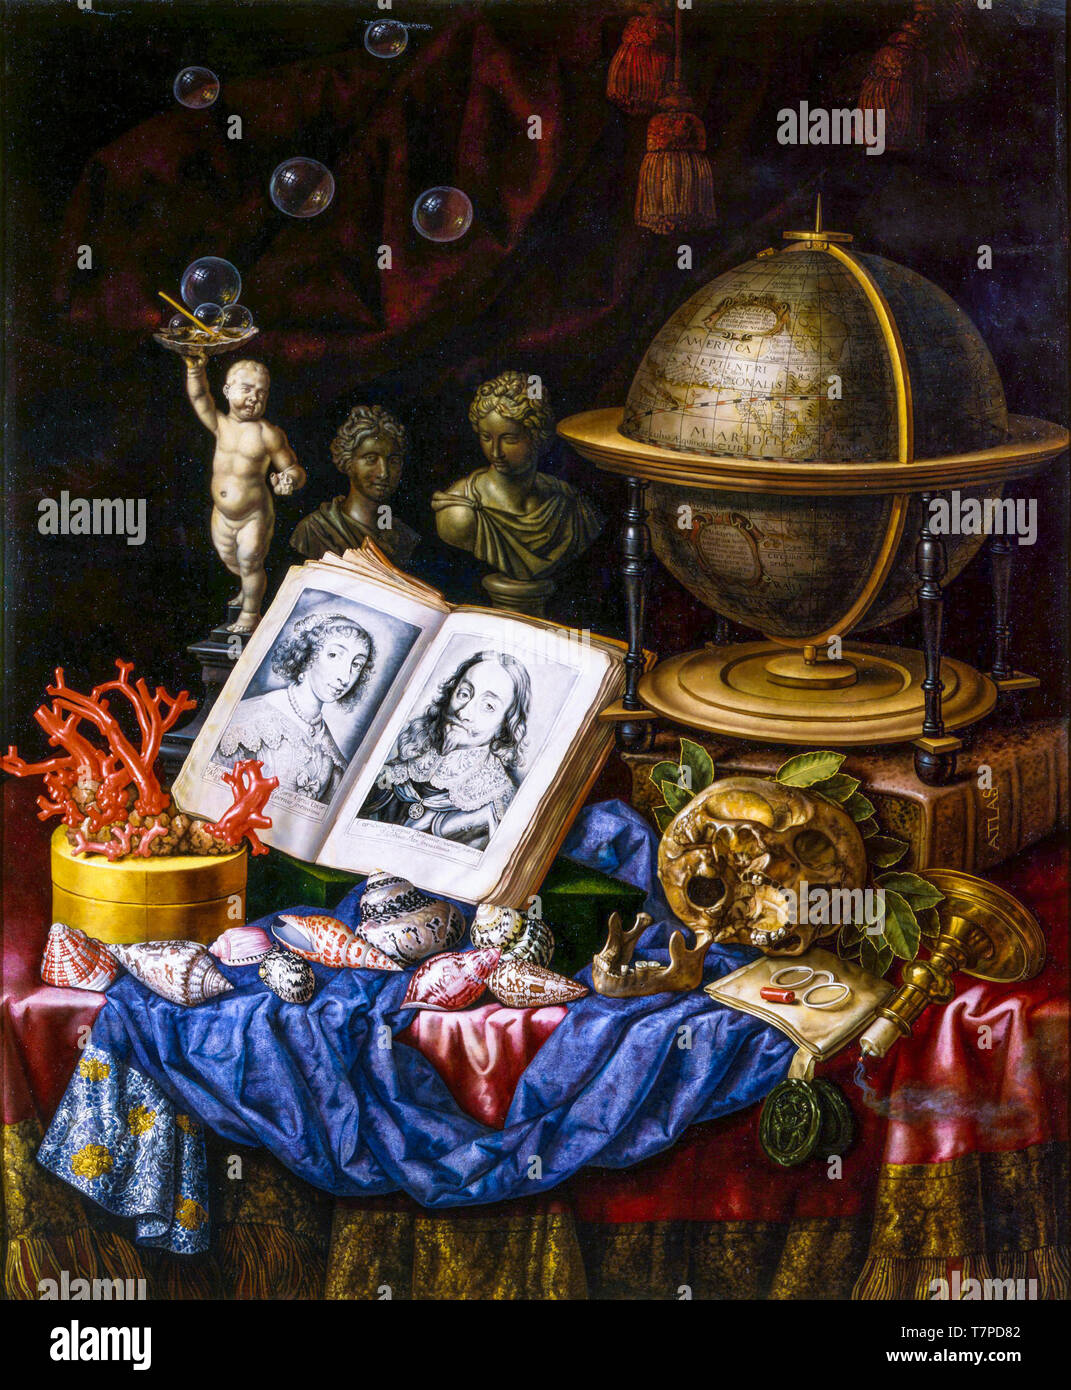 Carstian Luyckx, Allegory of Charles I of England and Henrietta of France in a Vanitas Still Life, painting, circa 1670s Stock Photo